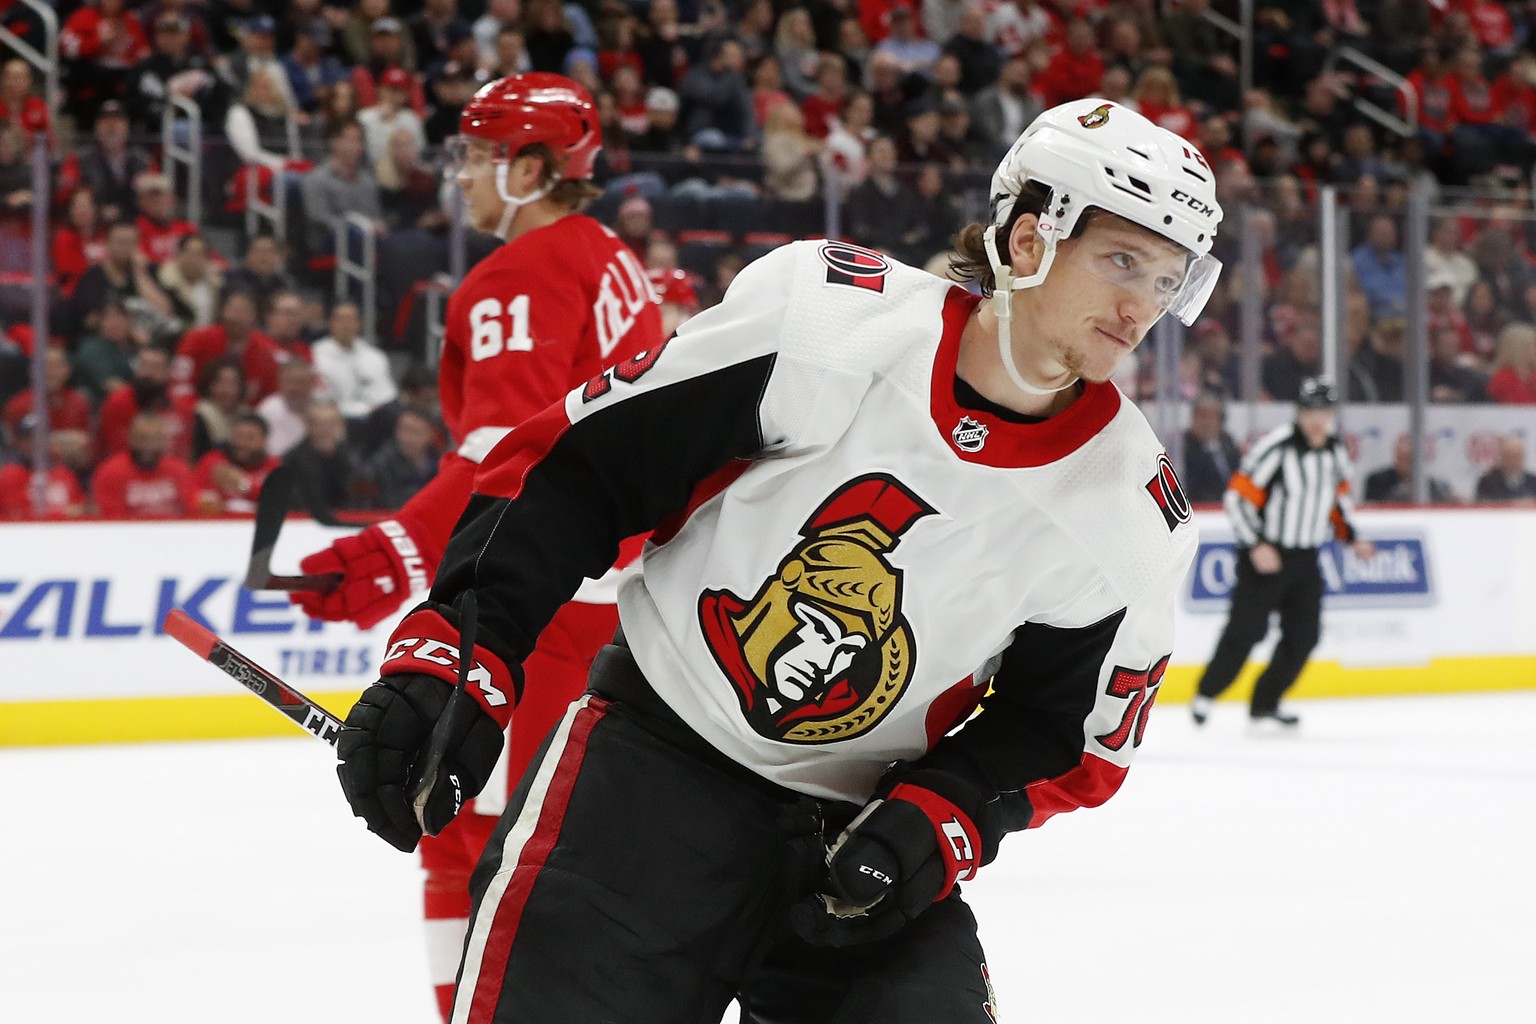 Ottawa Senators defenseman Thomas Chabot celebrates his goal against the Detroit Red Wings in the first period of an NHL hockey game Friday, Dec. 14, 2018, in Detroit. (AP Photo/Paul Sancya)